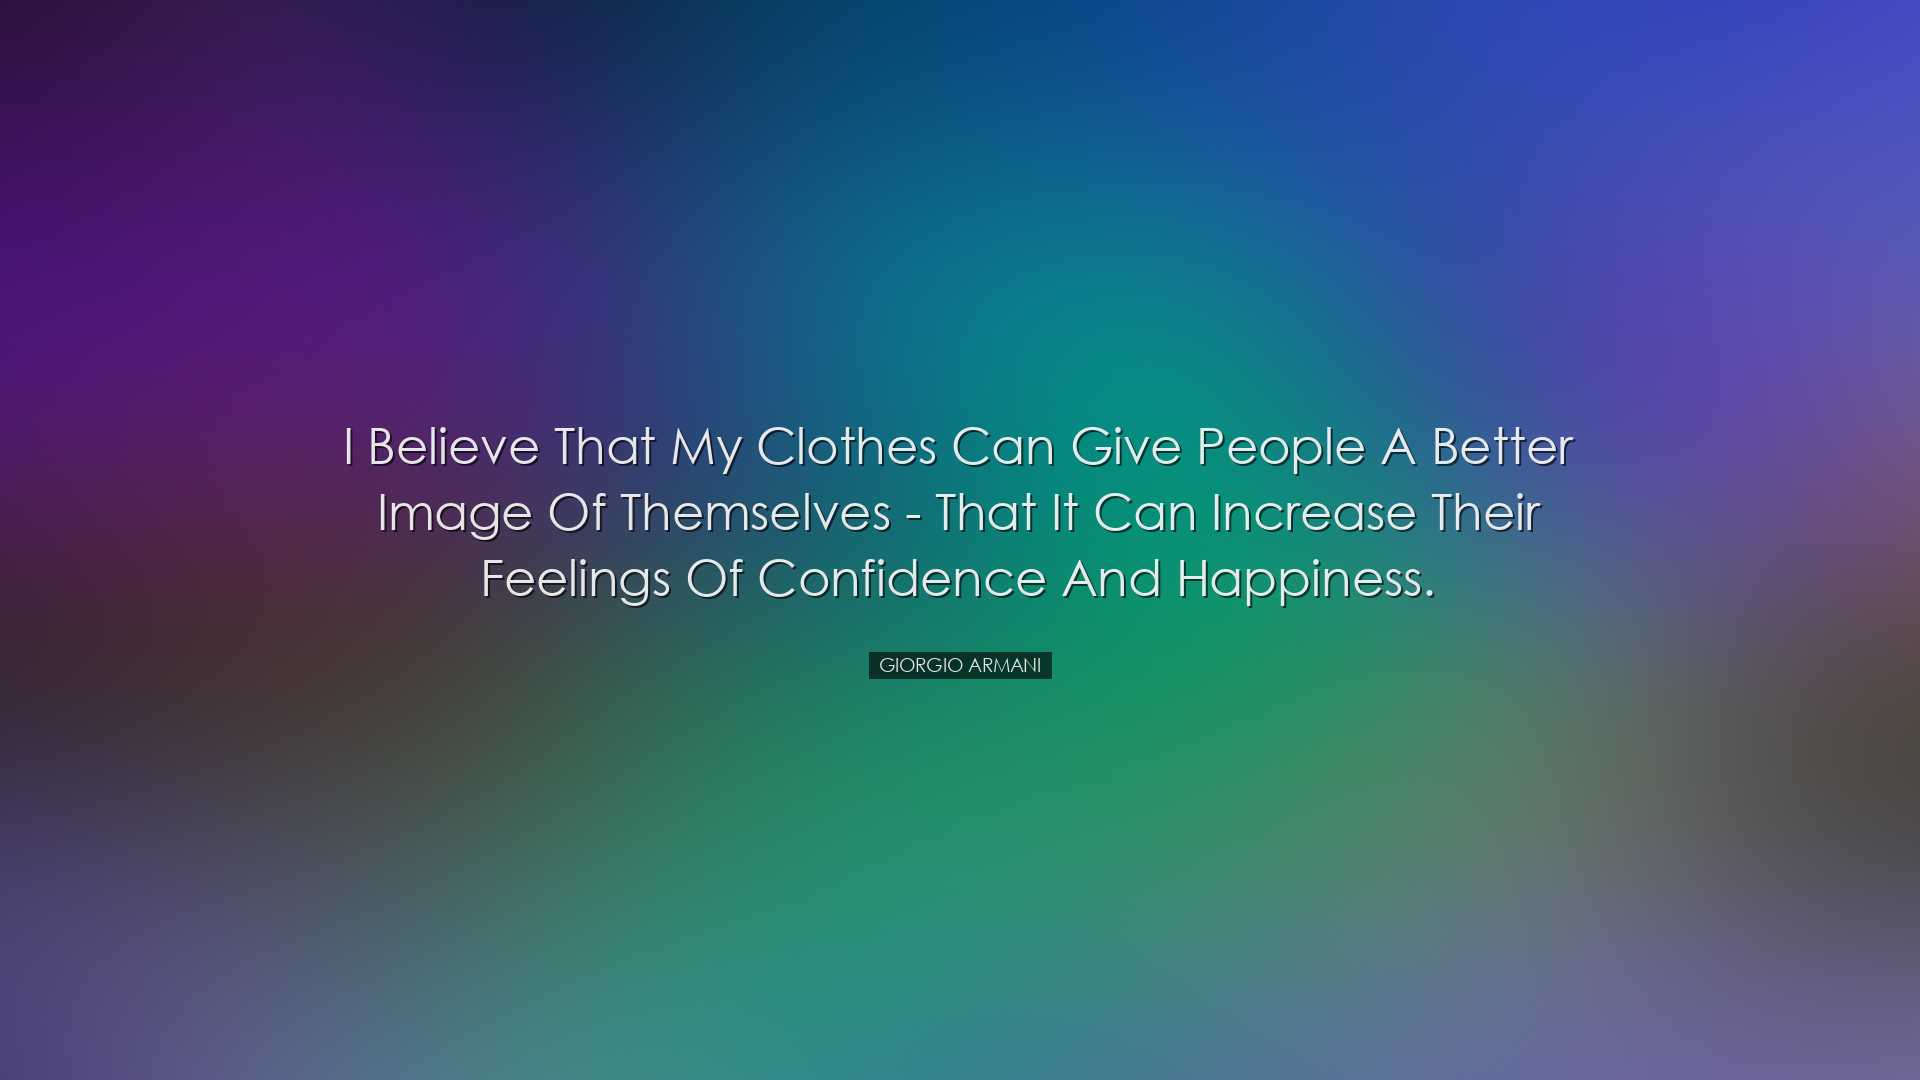 I believe that my clothes can give people a better image of themse